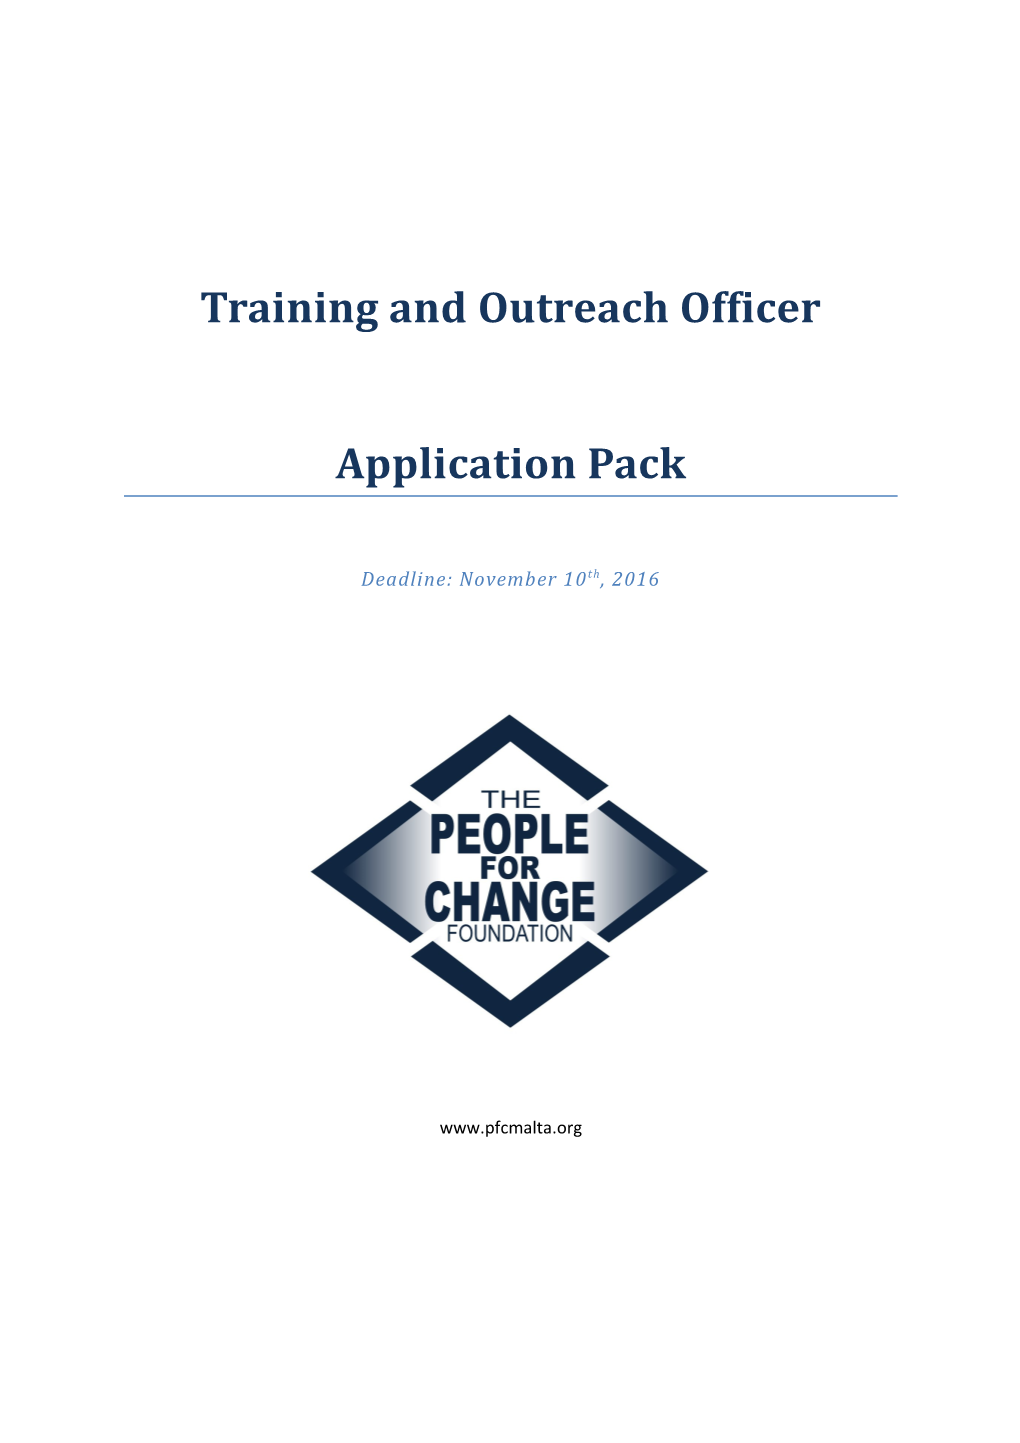 Training and Outreach Officer